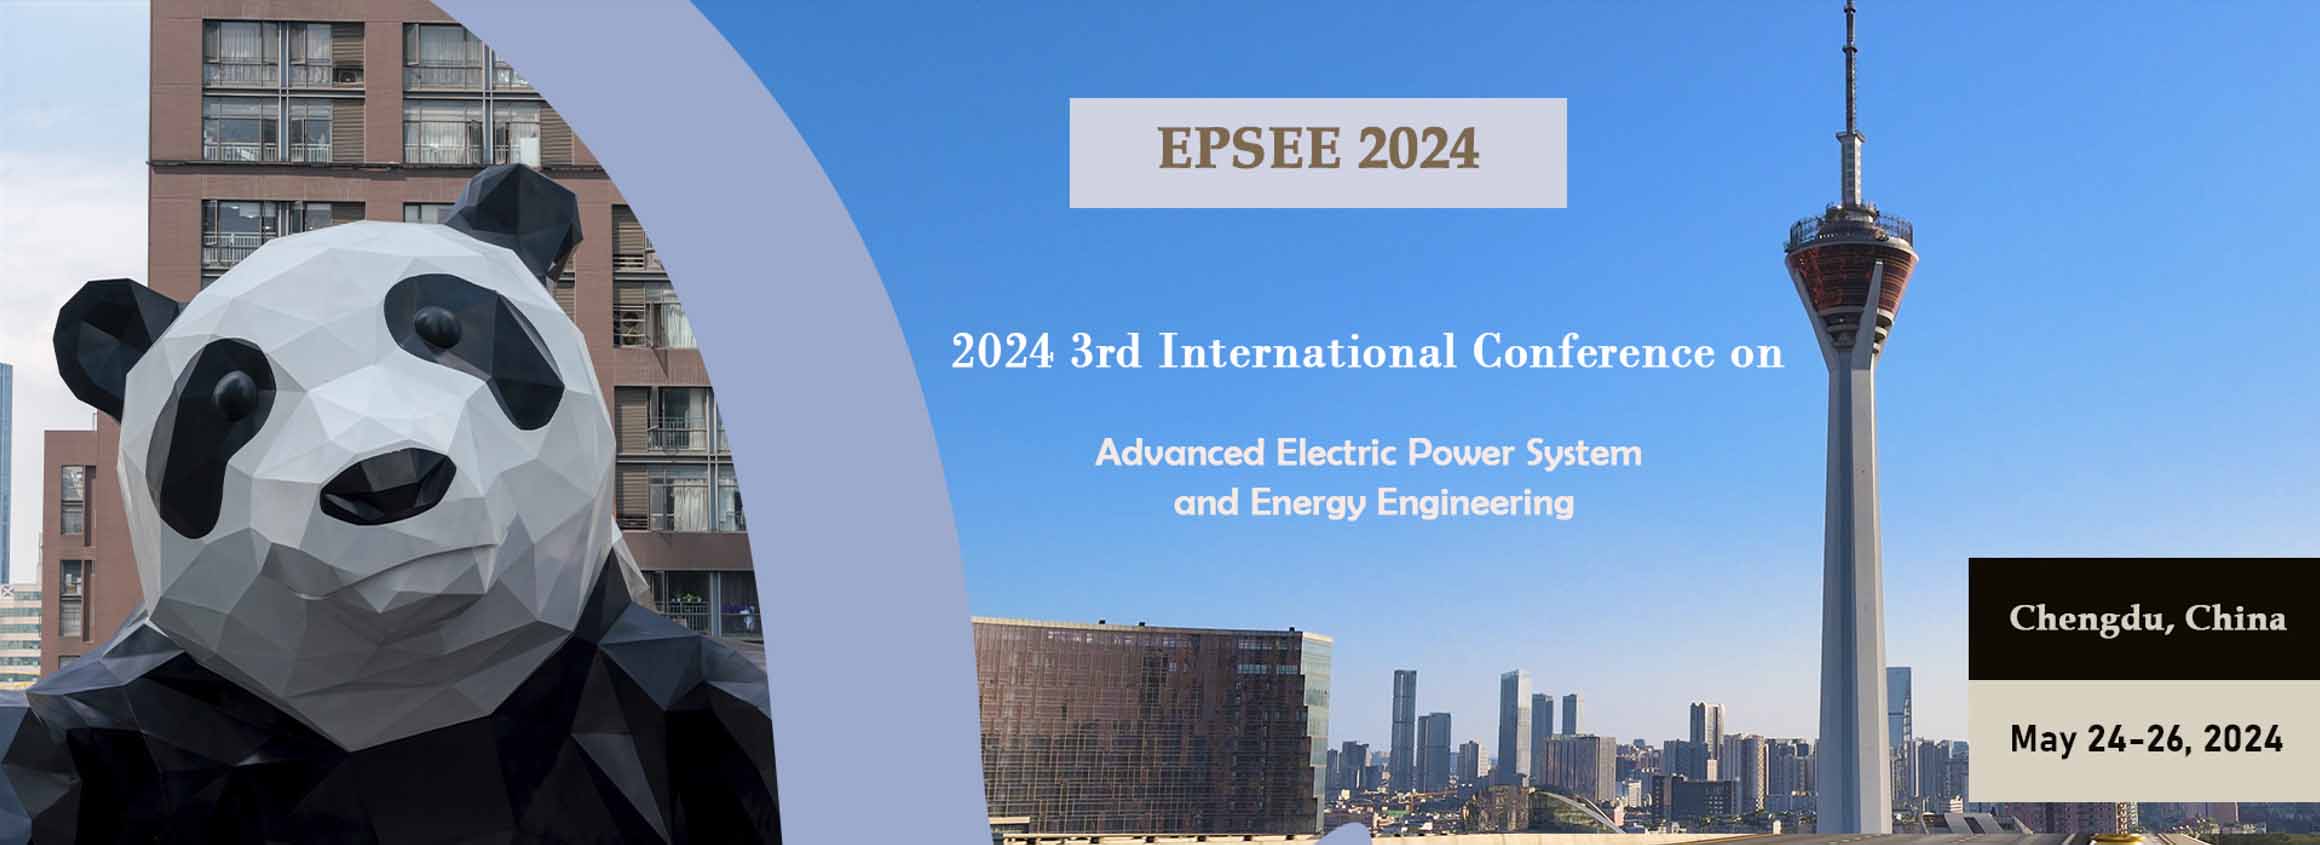 2024 3rd International Conference on Advanced Electric Power System and Energy Engineering (EPSEE 2024), Chengdu, Sichuan, China